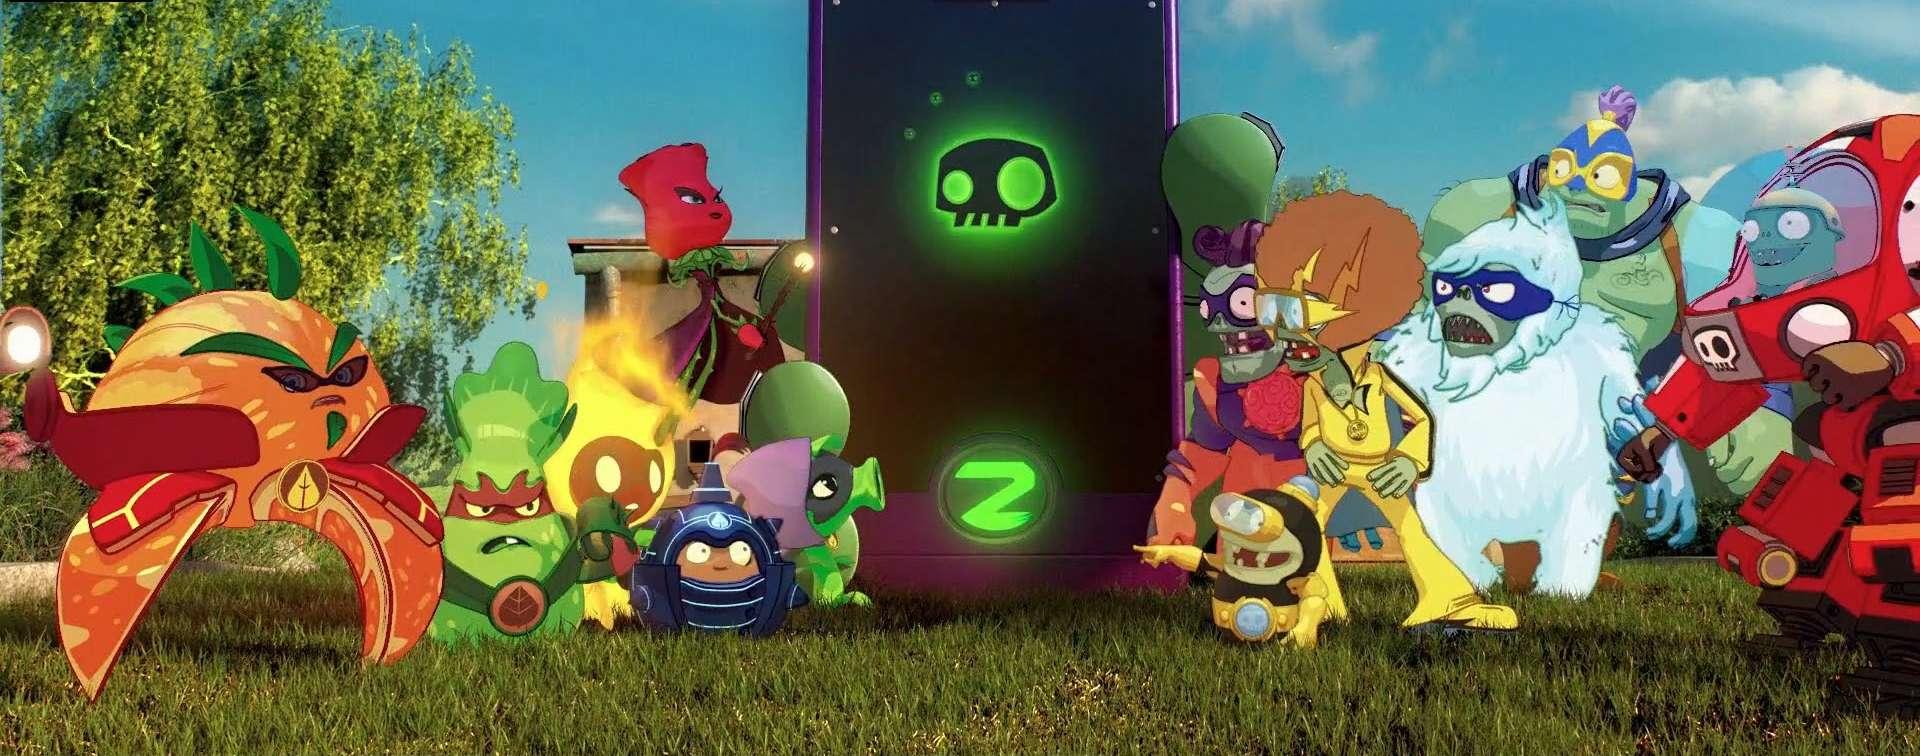 Plants vs Zombies Heroes The Lawn of a New Battle tung trailer mới - Tin Game Mobile